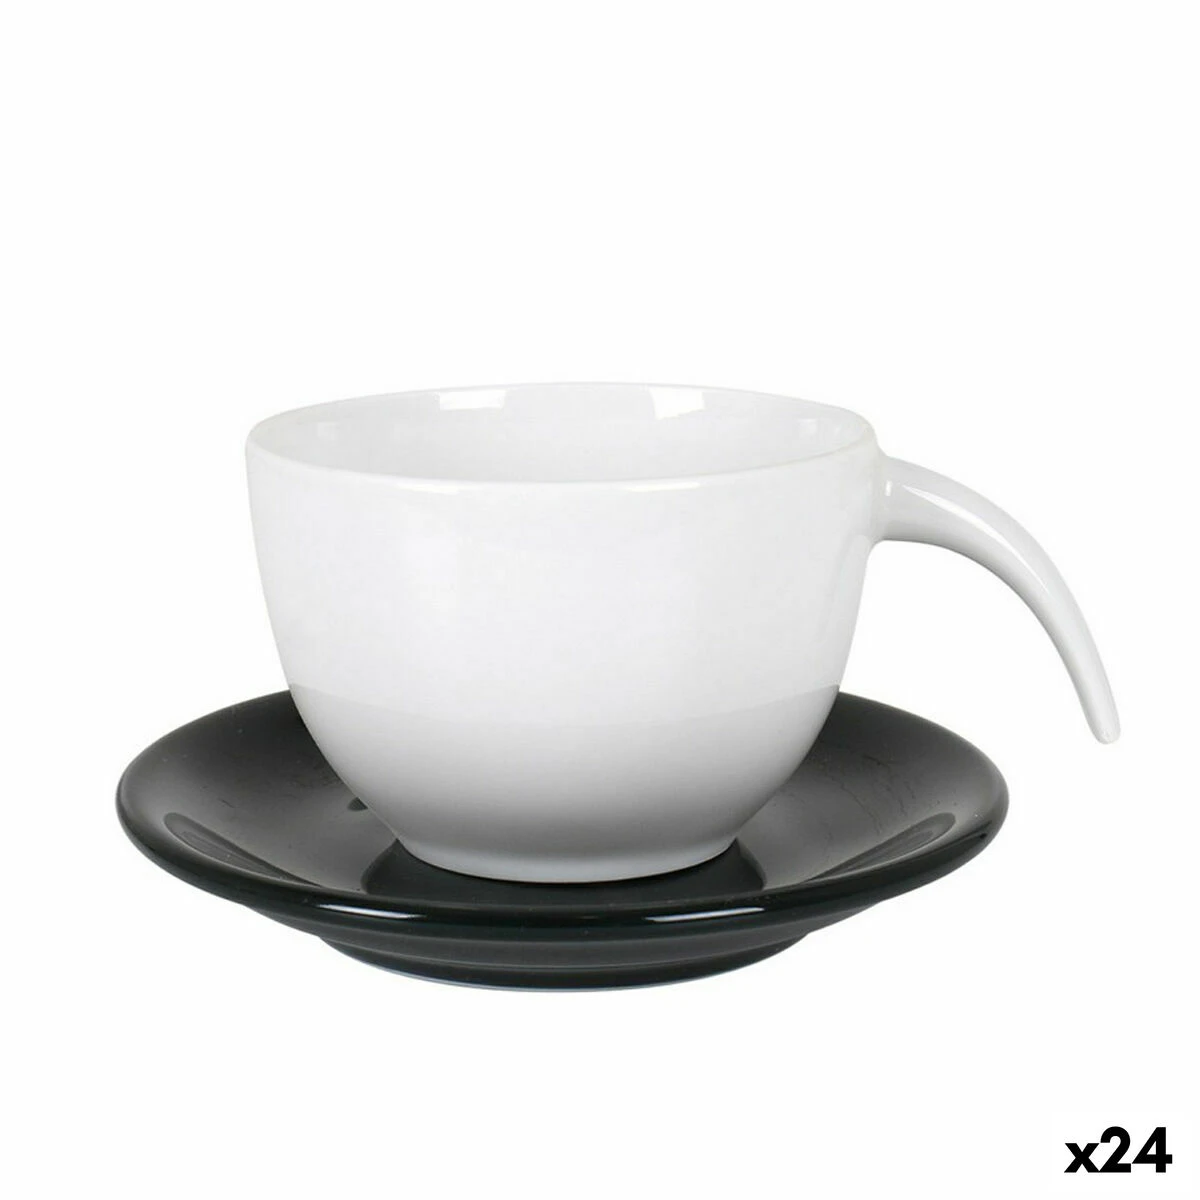 White cup on a black saucer